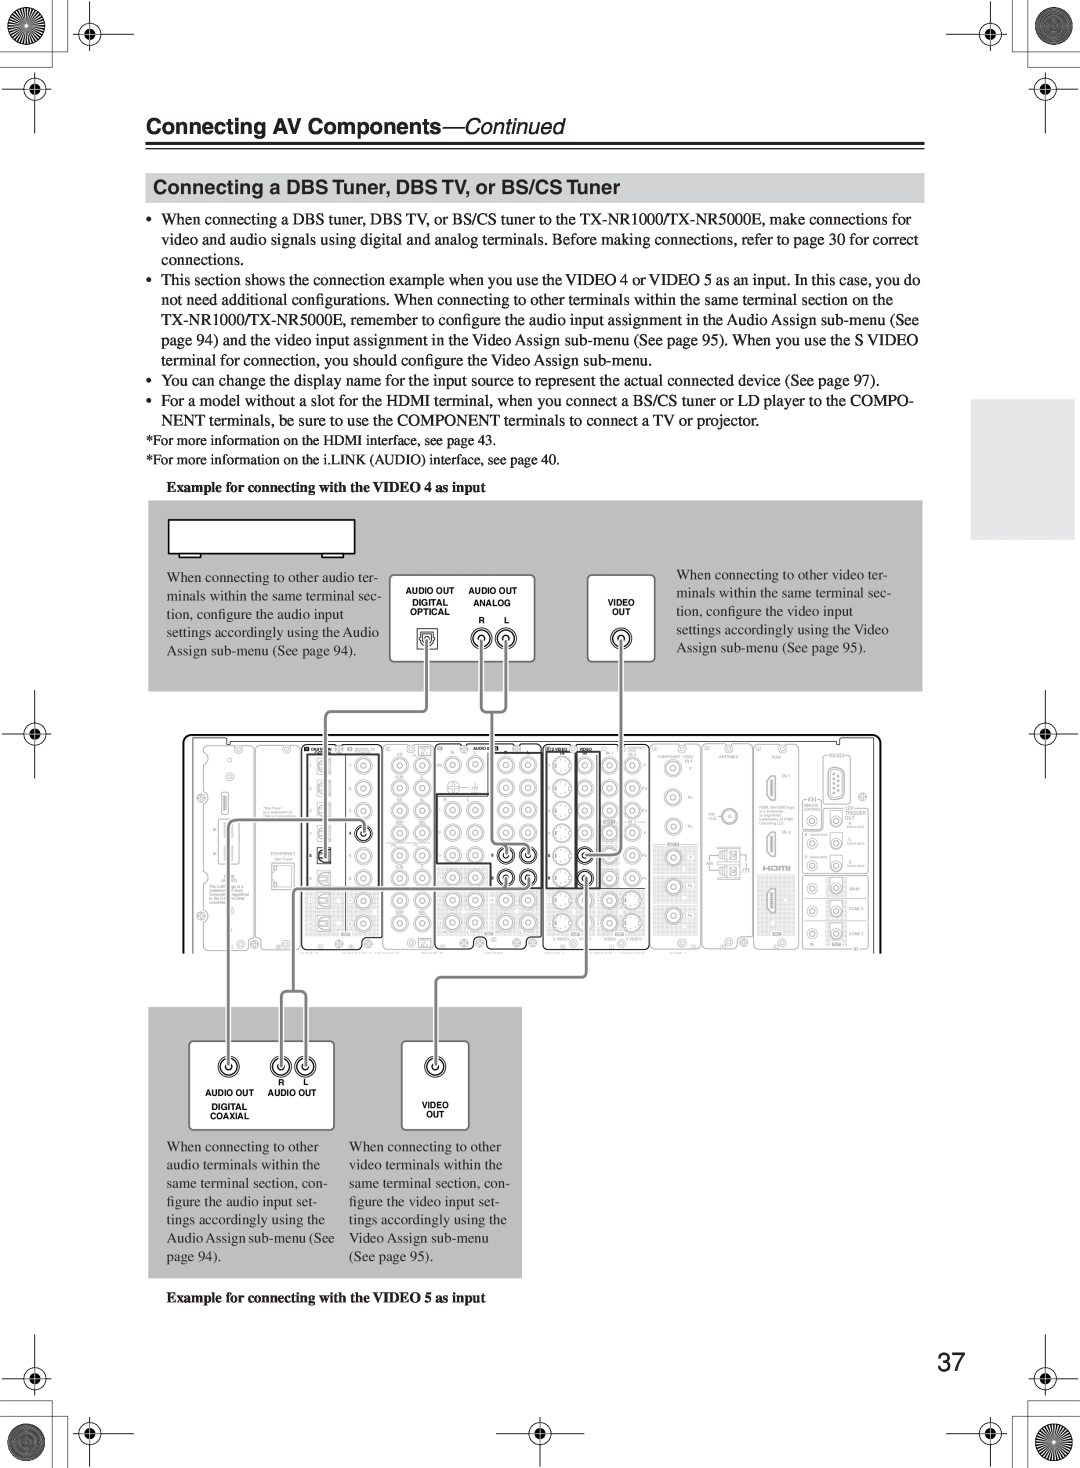 Onkyo TX-NR1000 instruction manual Connecting a DBS Tuner, DBS TV, or BS/CS Tuner, Connecting AV Components—Continued 